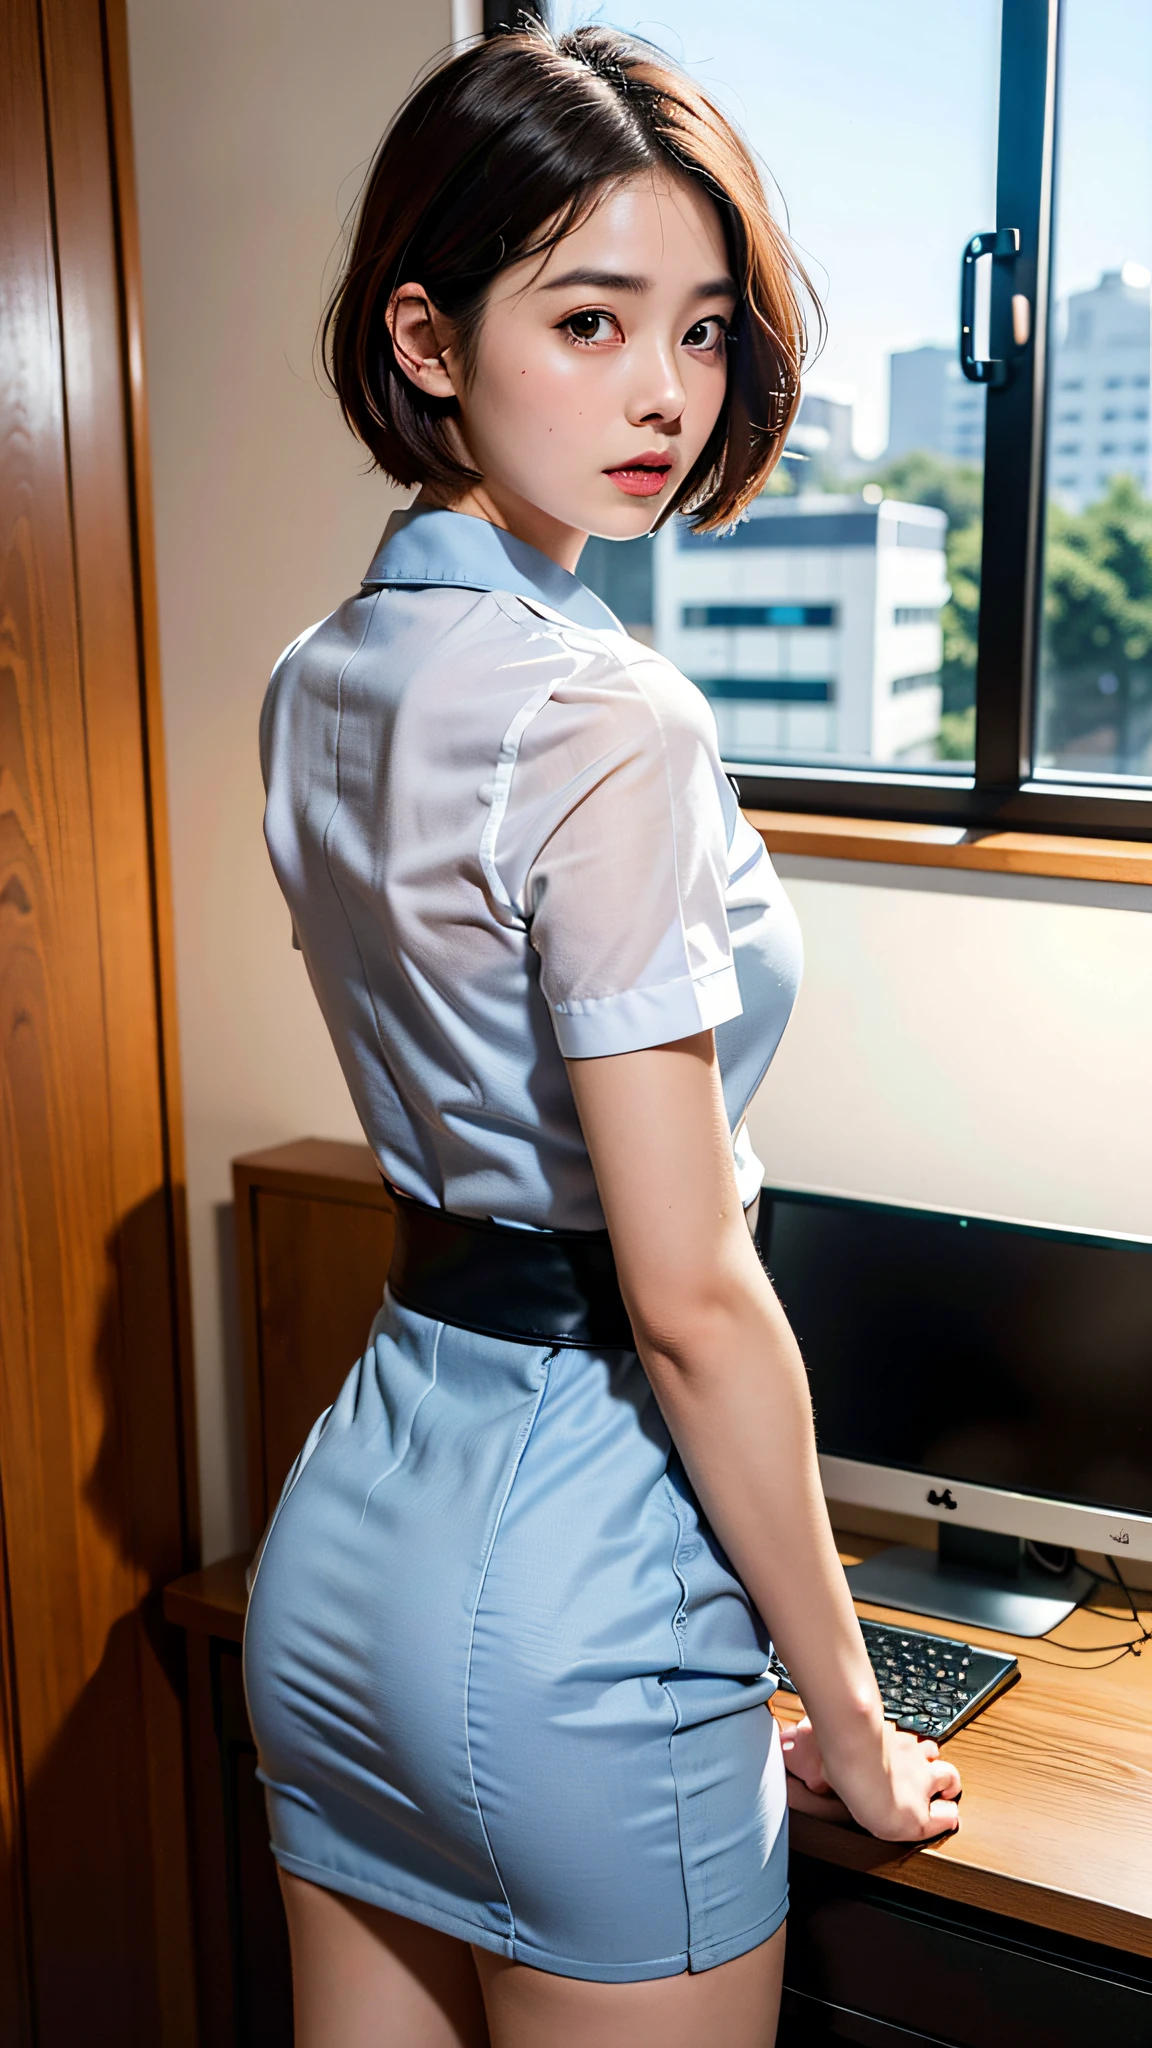 (Top Quality, 8k, Masterpiece, UHD: 1.2), 1 girl, beautiful Japan woman, constricted waist, office lady, office, desk, sticking ass out. shorthair, bob, Japan, brown hair